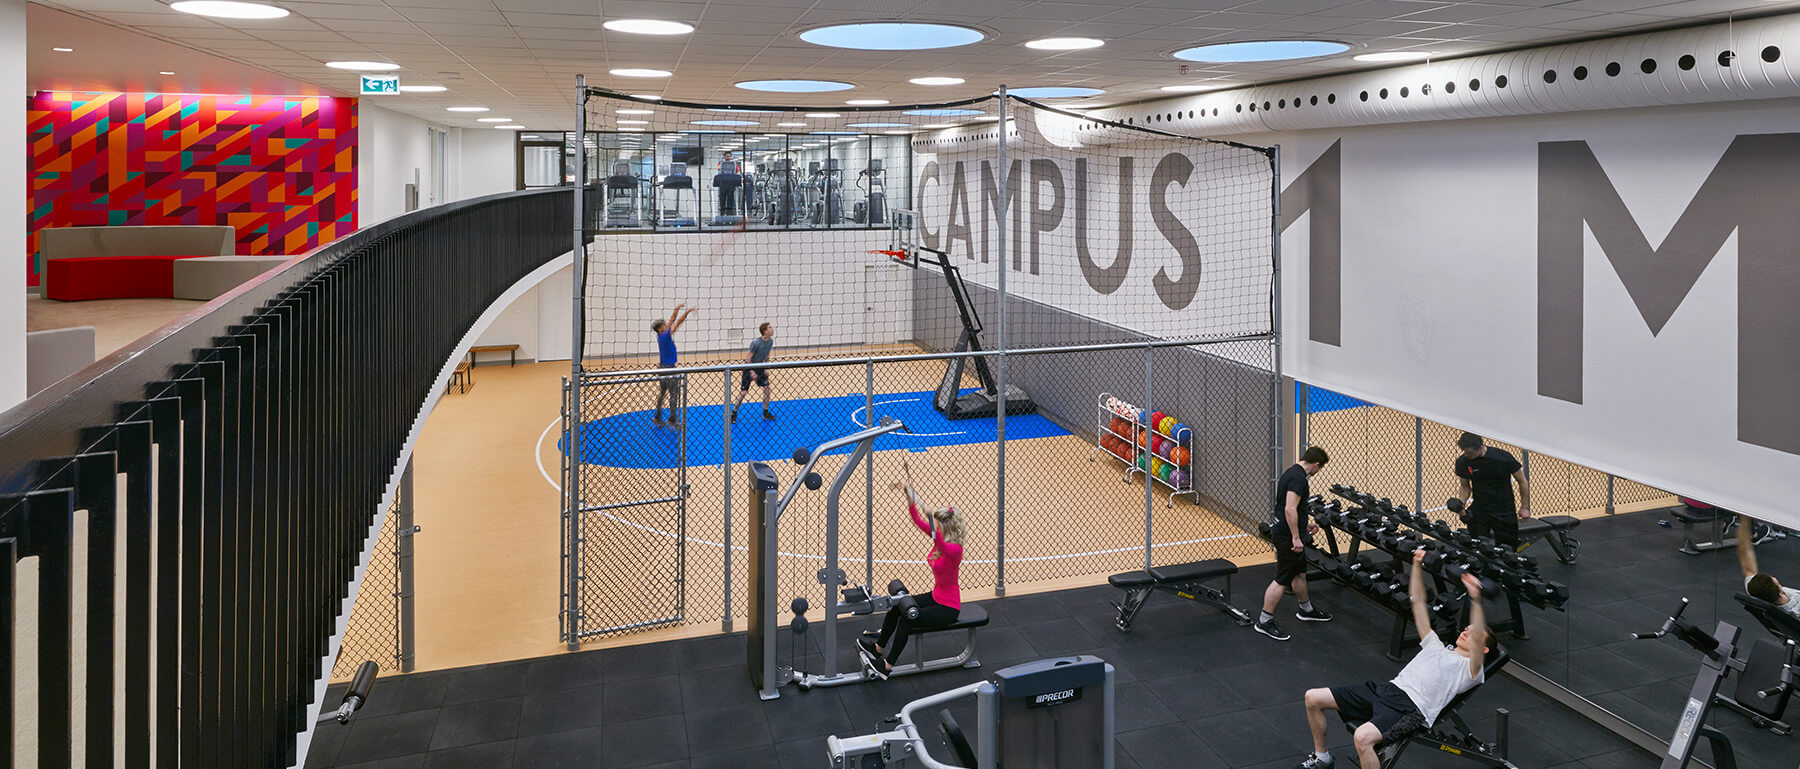 Fitness Centre & Indoor Basketball Court​